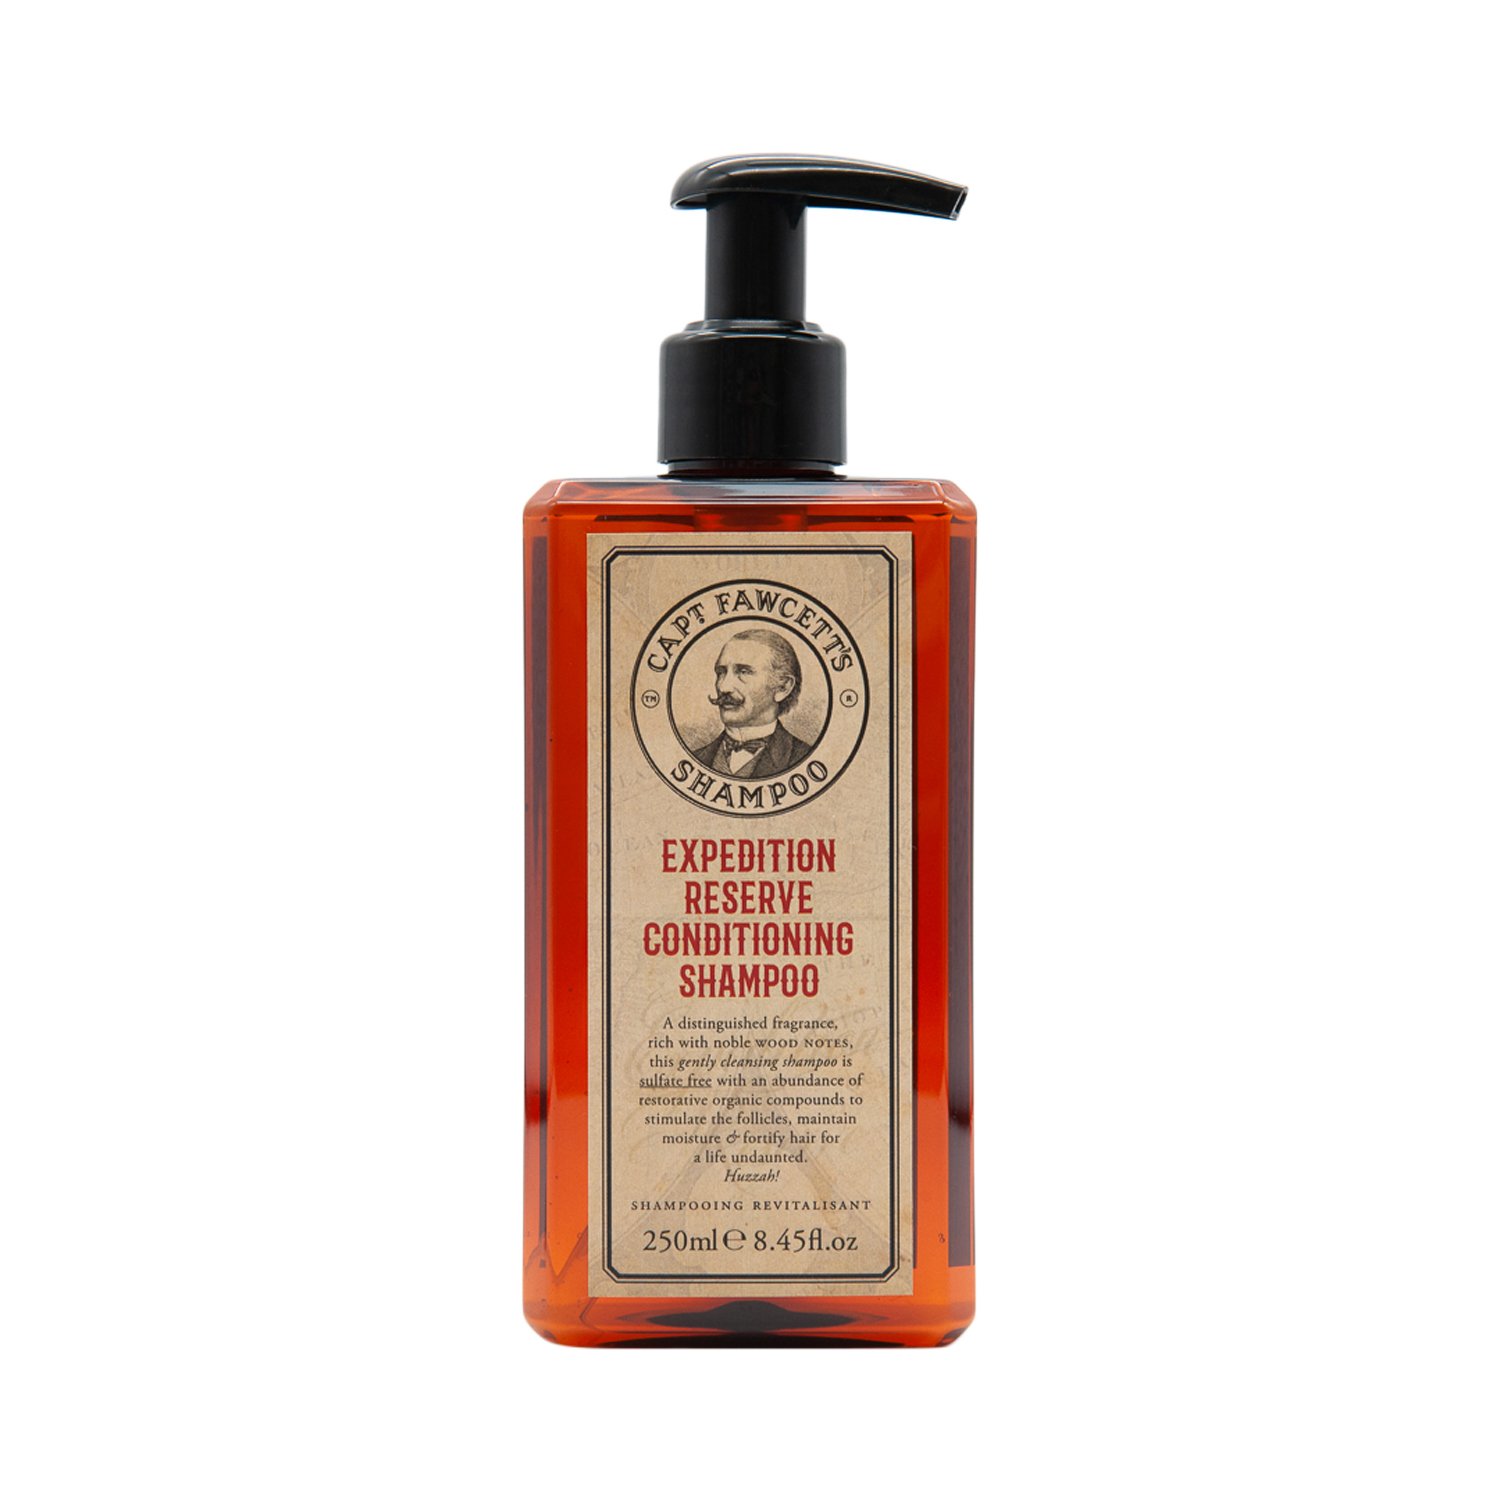 Captain Fawcett - Expedition Reserve Conditioning Shampoo